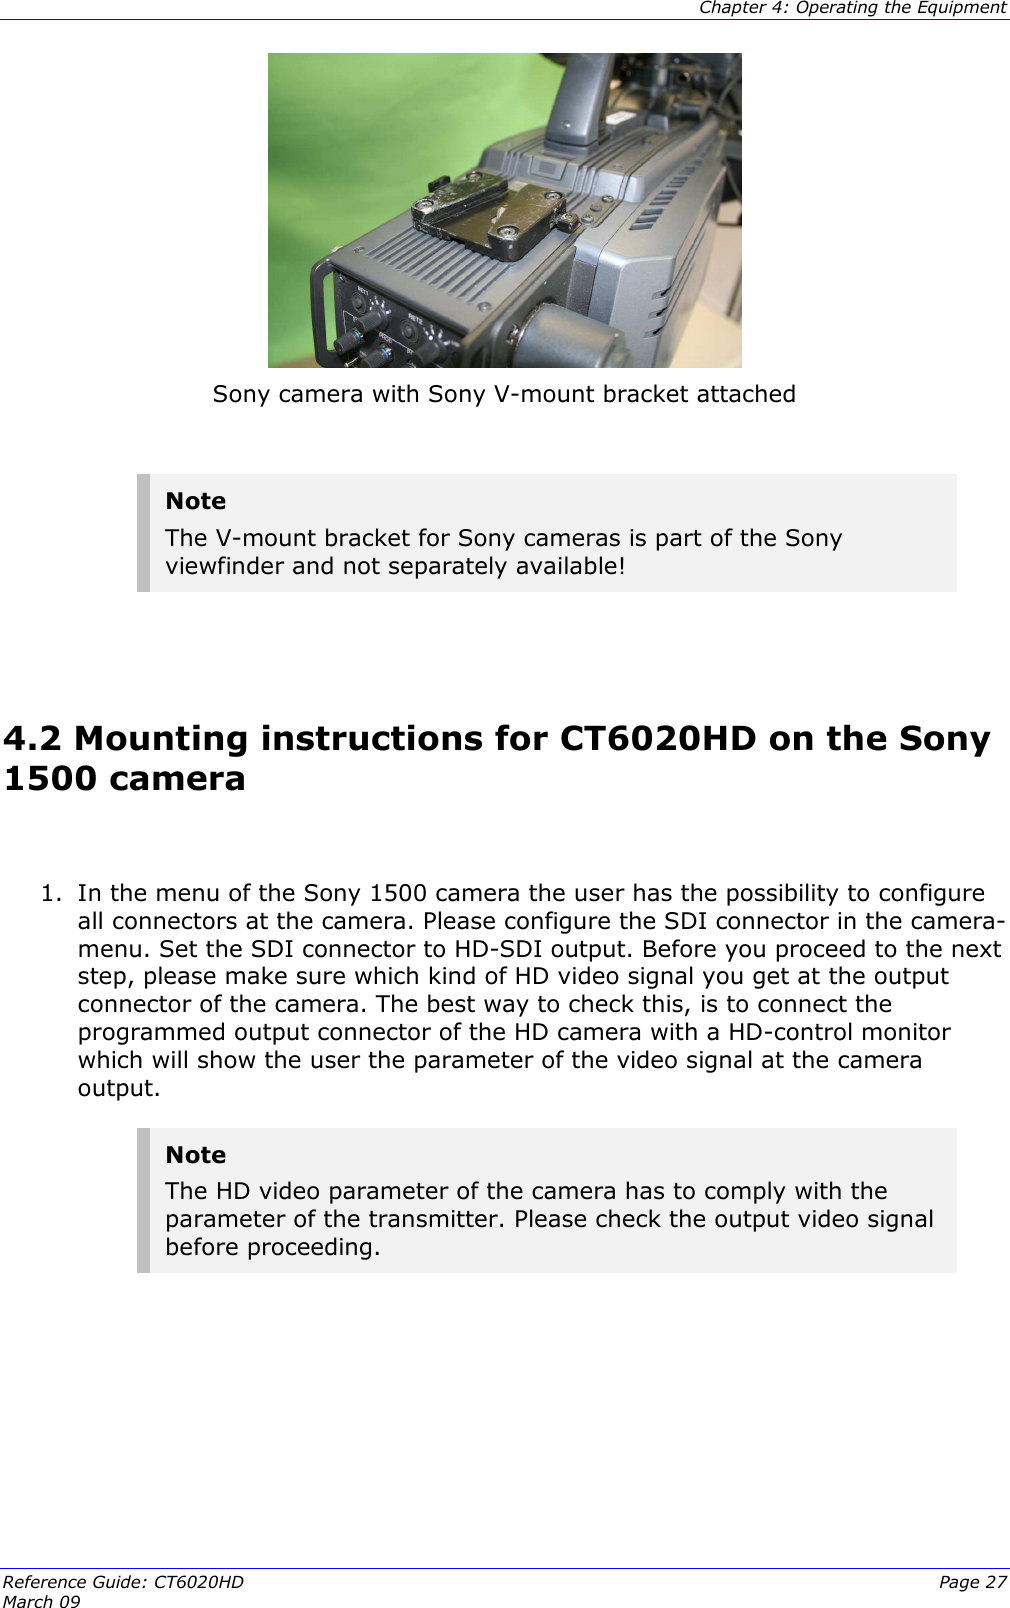  Chapter 4: Operating the Equipment Reference Guide: CT6020HD  Page 27 March 09    Sony camera with Sony V-mount bracket attached  Note The V-mount bracket for Sony cameras is part of the Sony viewfinder and not separately available!   4.2 Mounting instructions for CT6020HD on the Sony 1500 camera   1. In the menu of the Sony 1500 camera the user has the possibility to configure all connectors at the camera. Please configure the SDI connector in the camera-menu. Set the SDI connector to HD-SDI output. Before you proceed to the next step, please make sure which kind of HD video signal you get at the output connector of the camera. The best way to check this, is to connect the programmed output connector of the HD camera with a HD-control monitor which will show the user the parameter of the video signal at the camera output.  Note The HD video parameter of the camera has to comply with the parameter of the transmitter. Please check the output video signal before proceeding.       